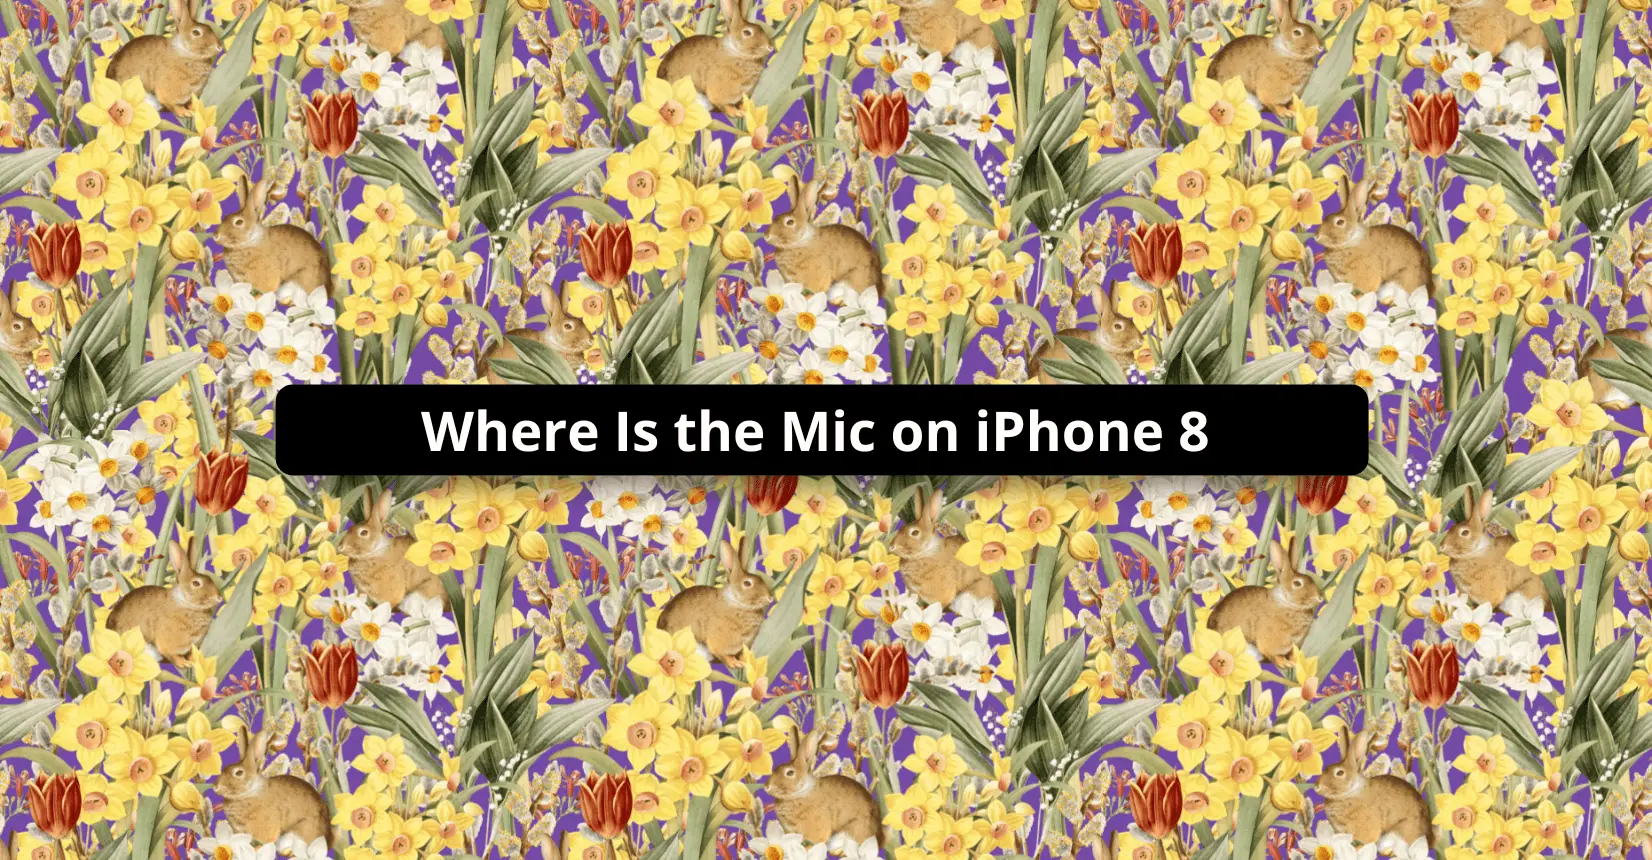 Where Is the Mic on iPhone 8